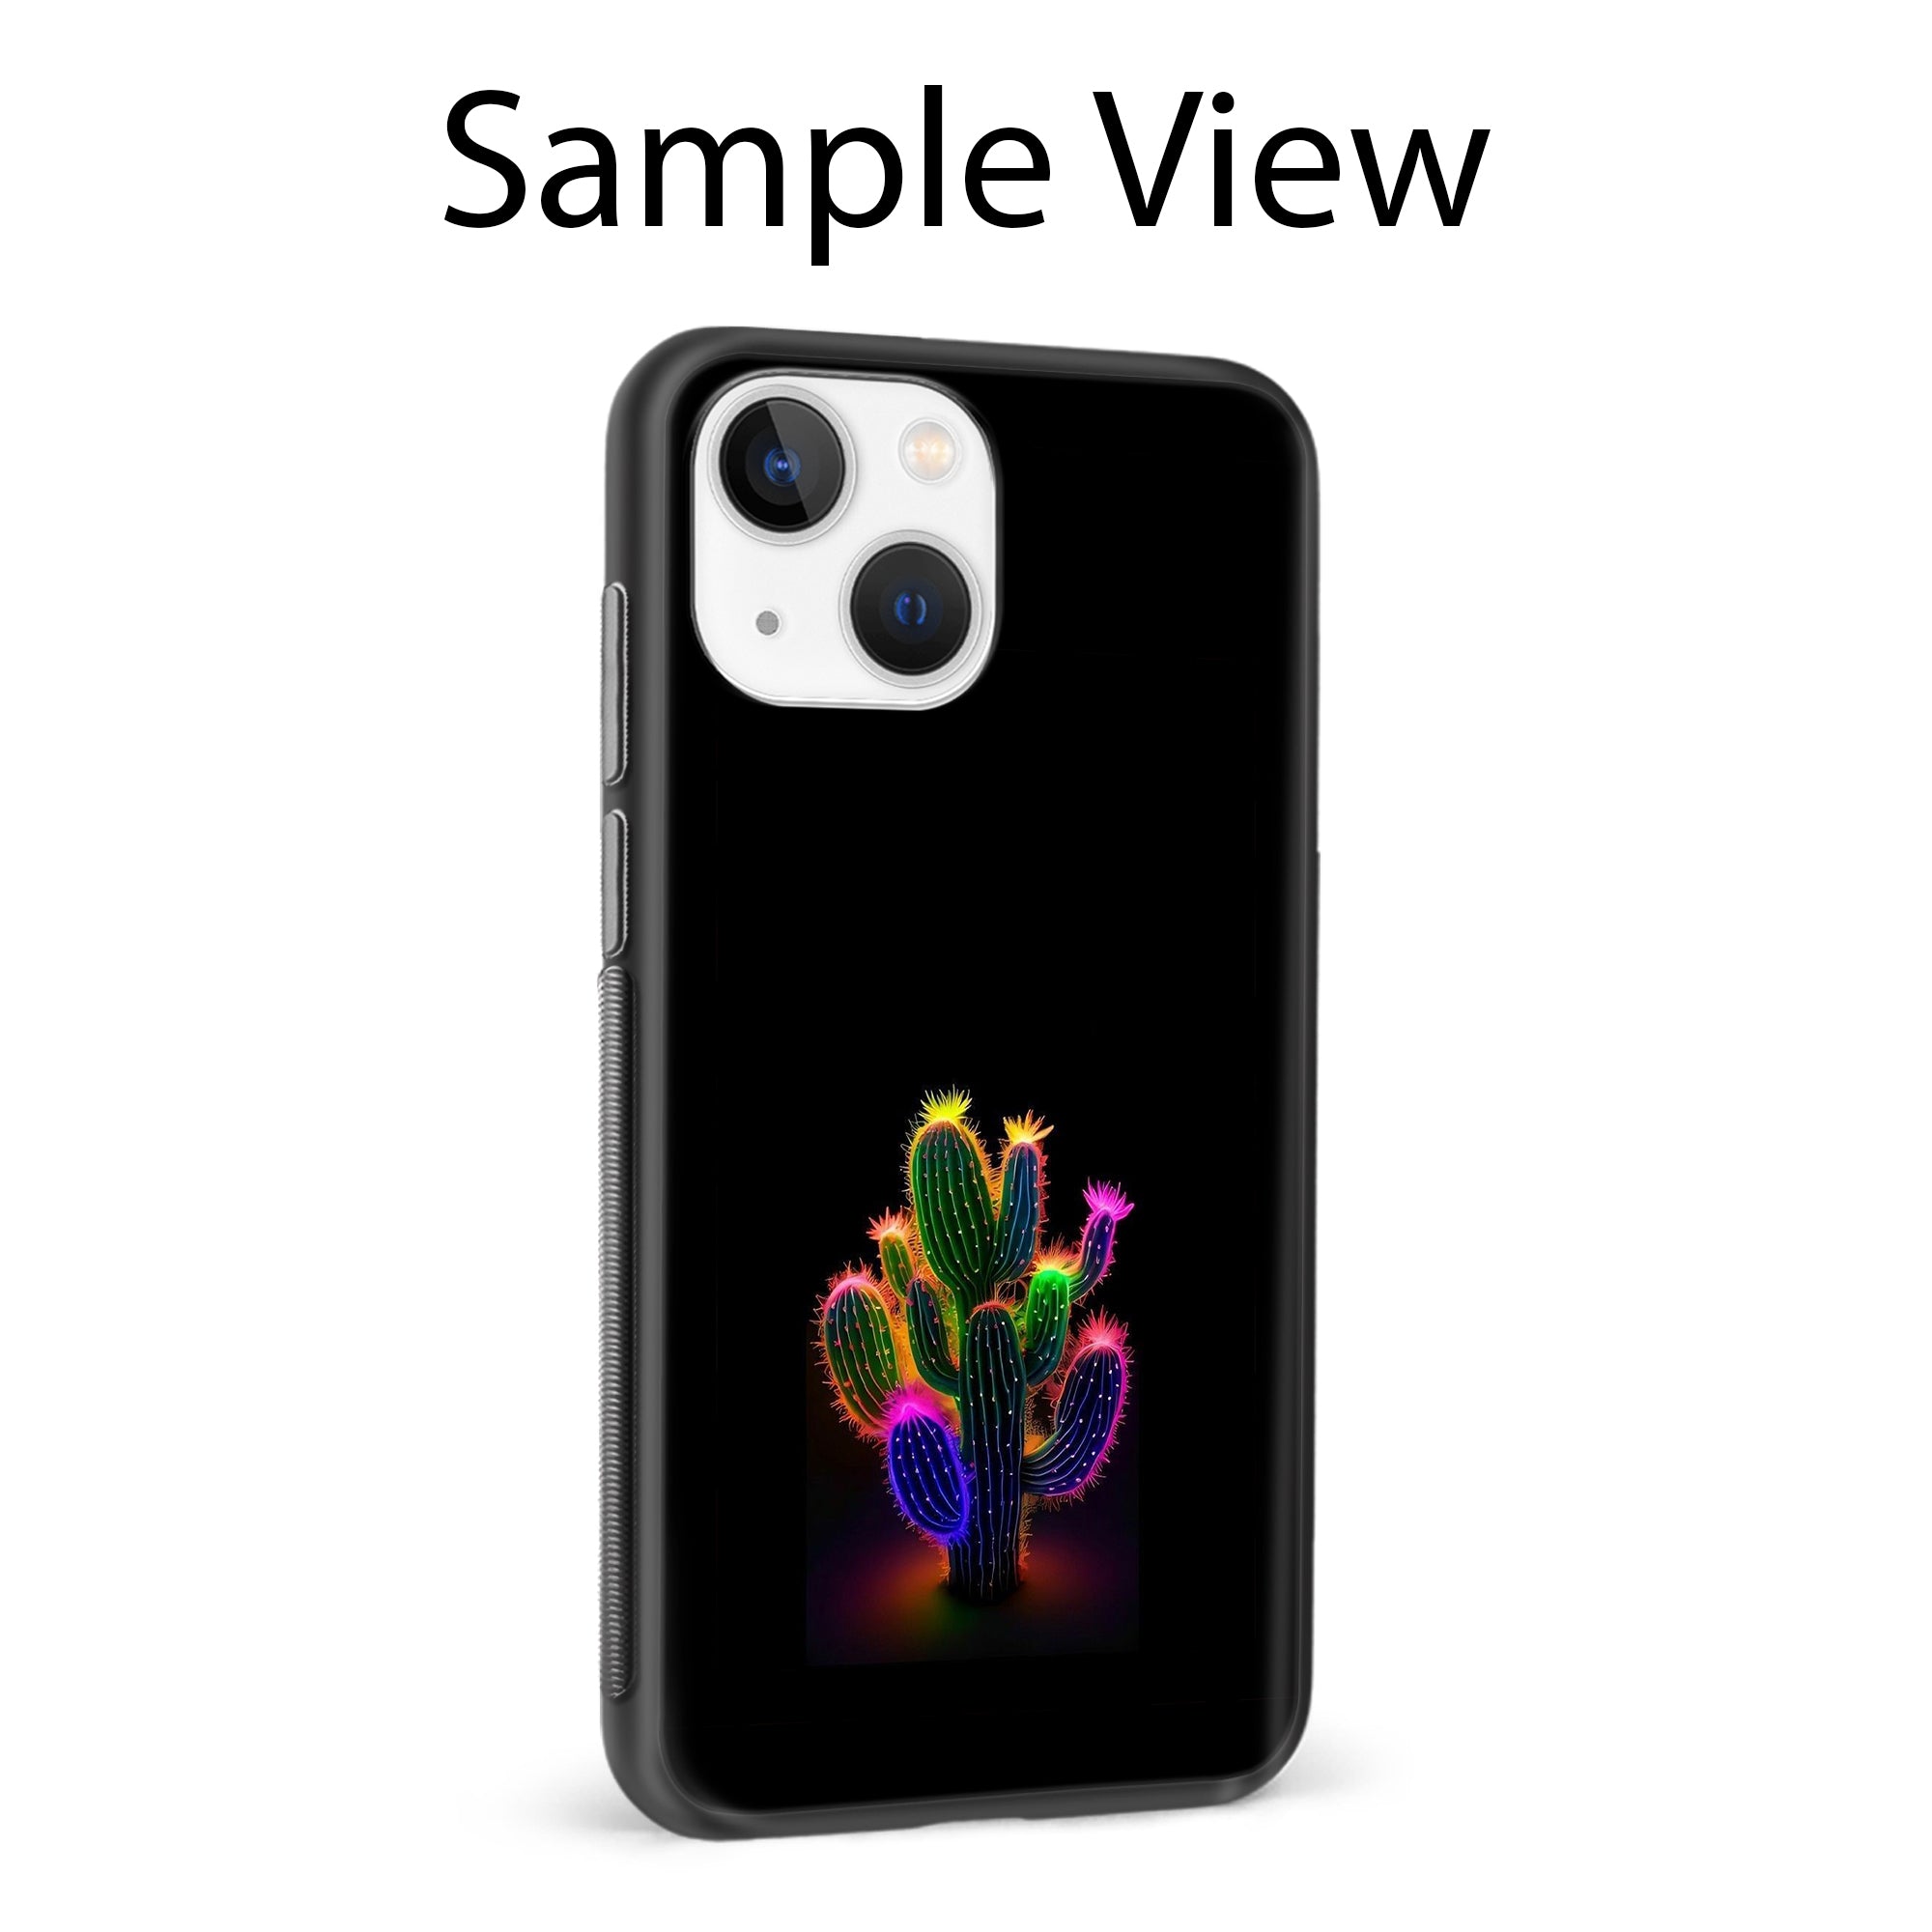 Buy Neon Flower Metal-Silicon Back Mobile Phone Case/Cover For Samsung Galaxy A50 / A50s / A30s Online